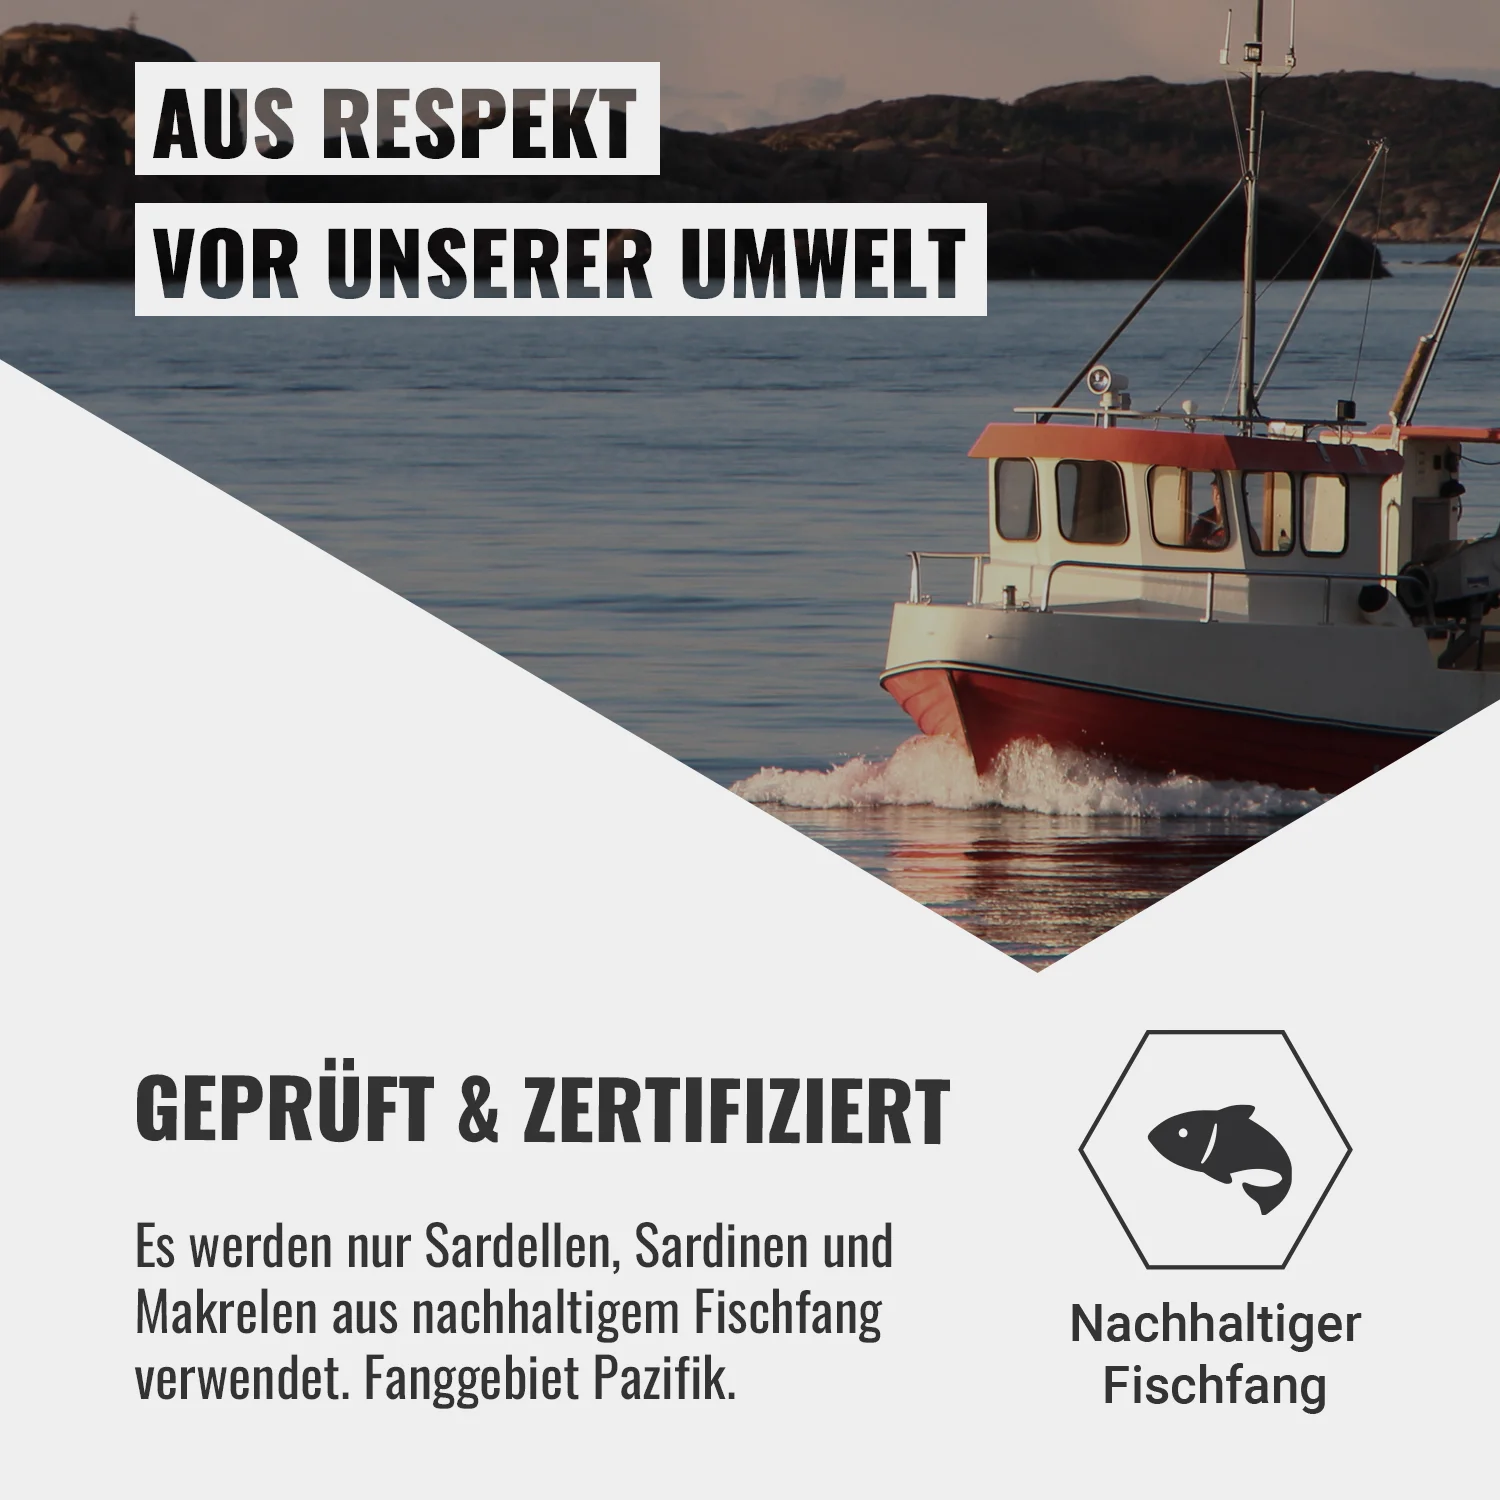 Out of respect for our environment | TESTED & CERTIFIED - Only sustainably caught anchovies, sardines and mackerels from the Pacific fishing area are used.